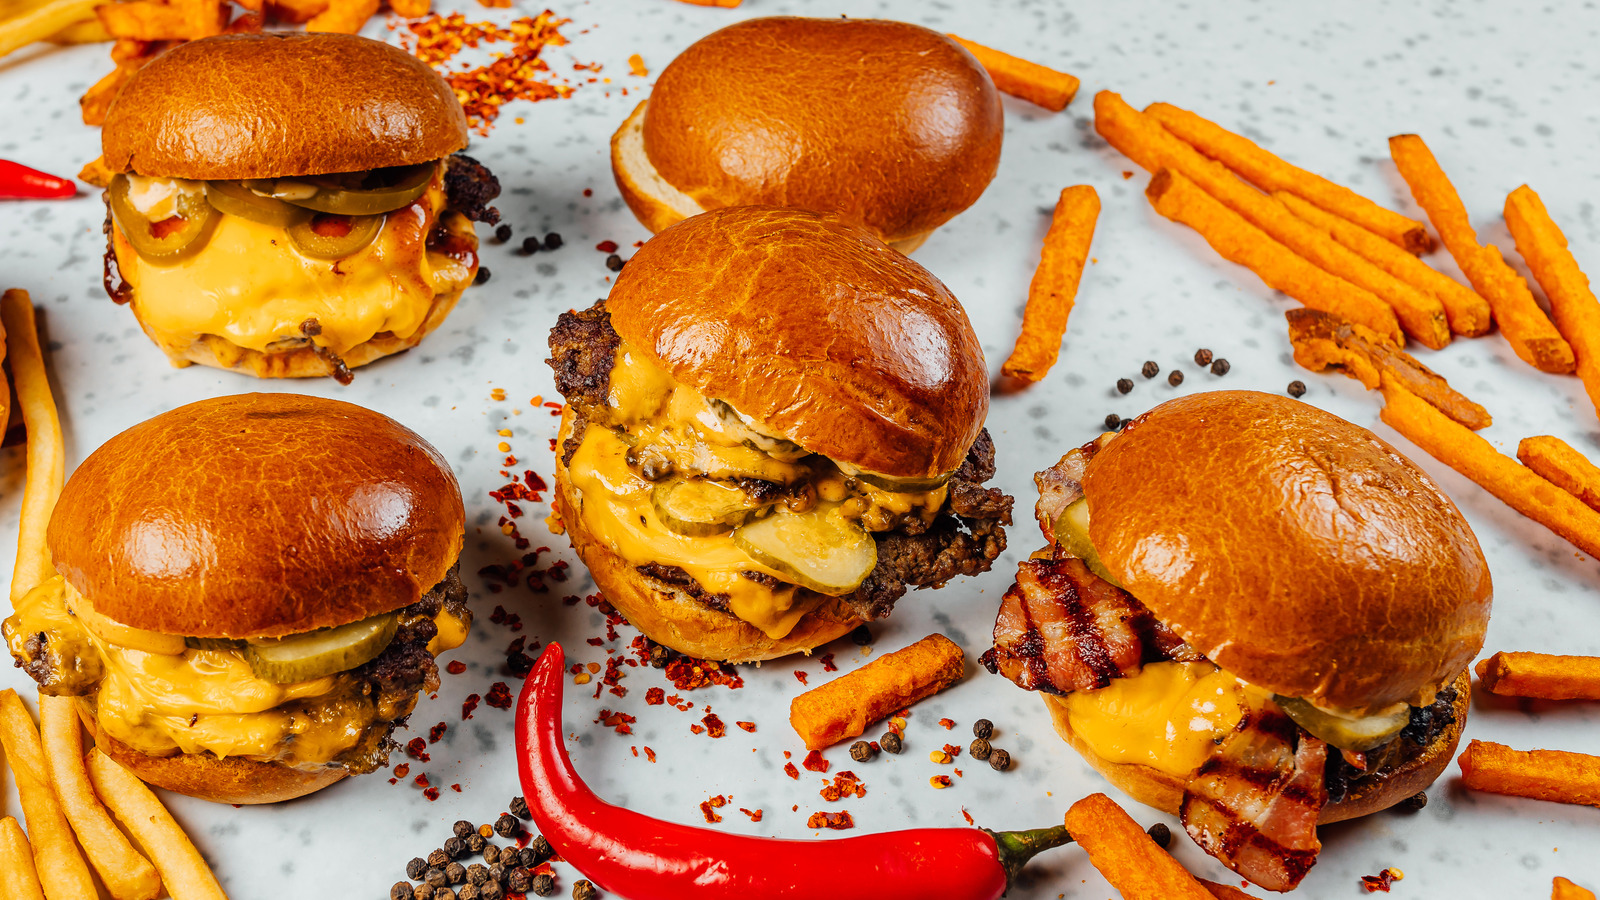 https://www.tastingtable.com/img/gallery/the-trick-to-properly-smashing-burgers/l-intro-1664218587.jpg